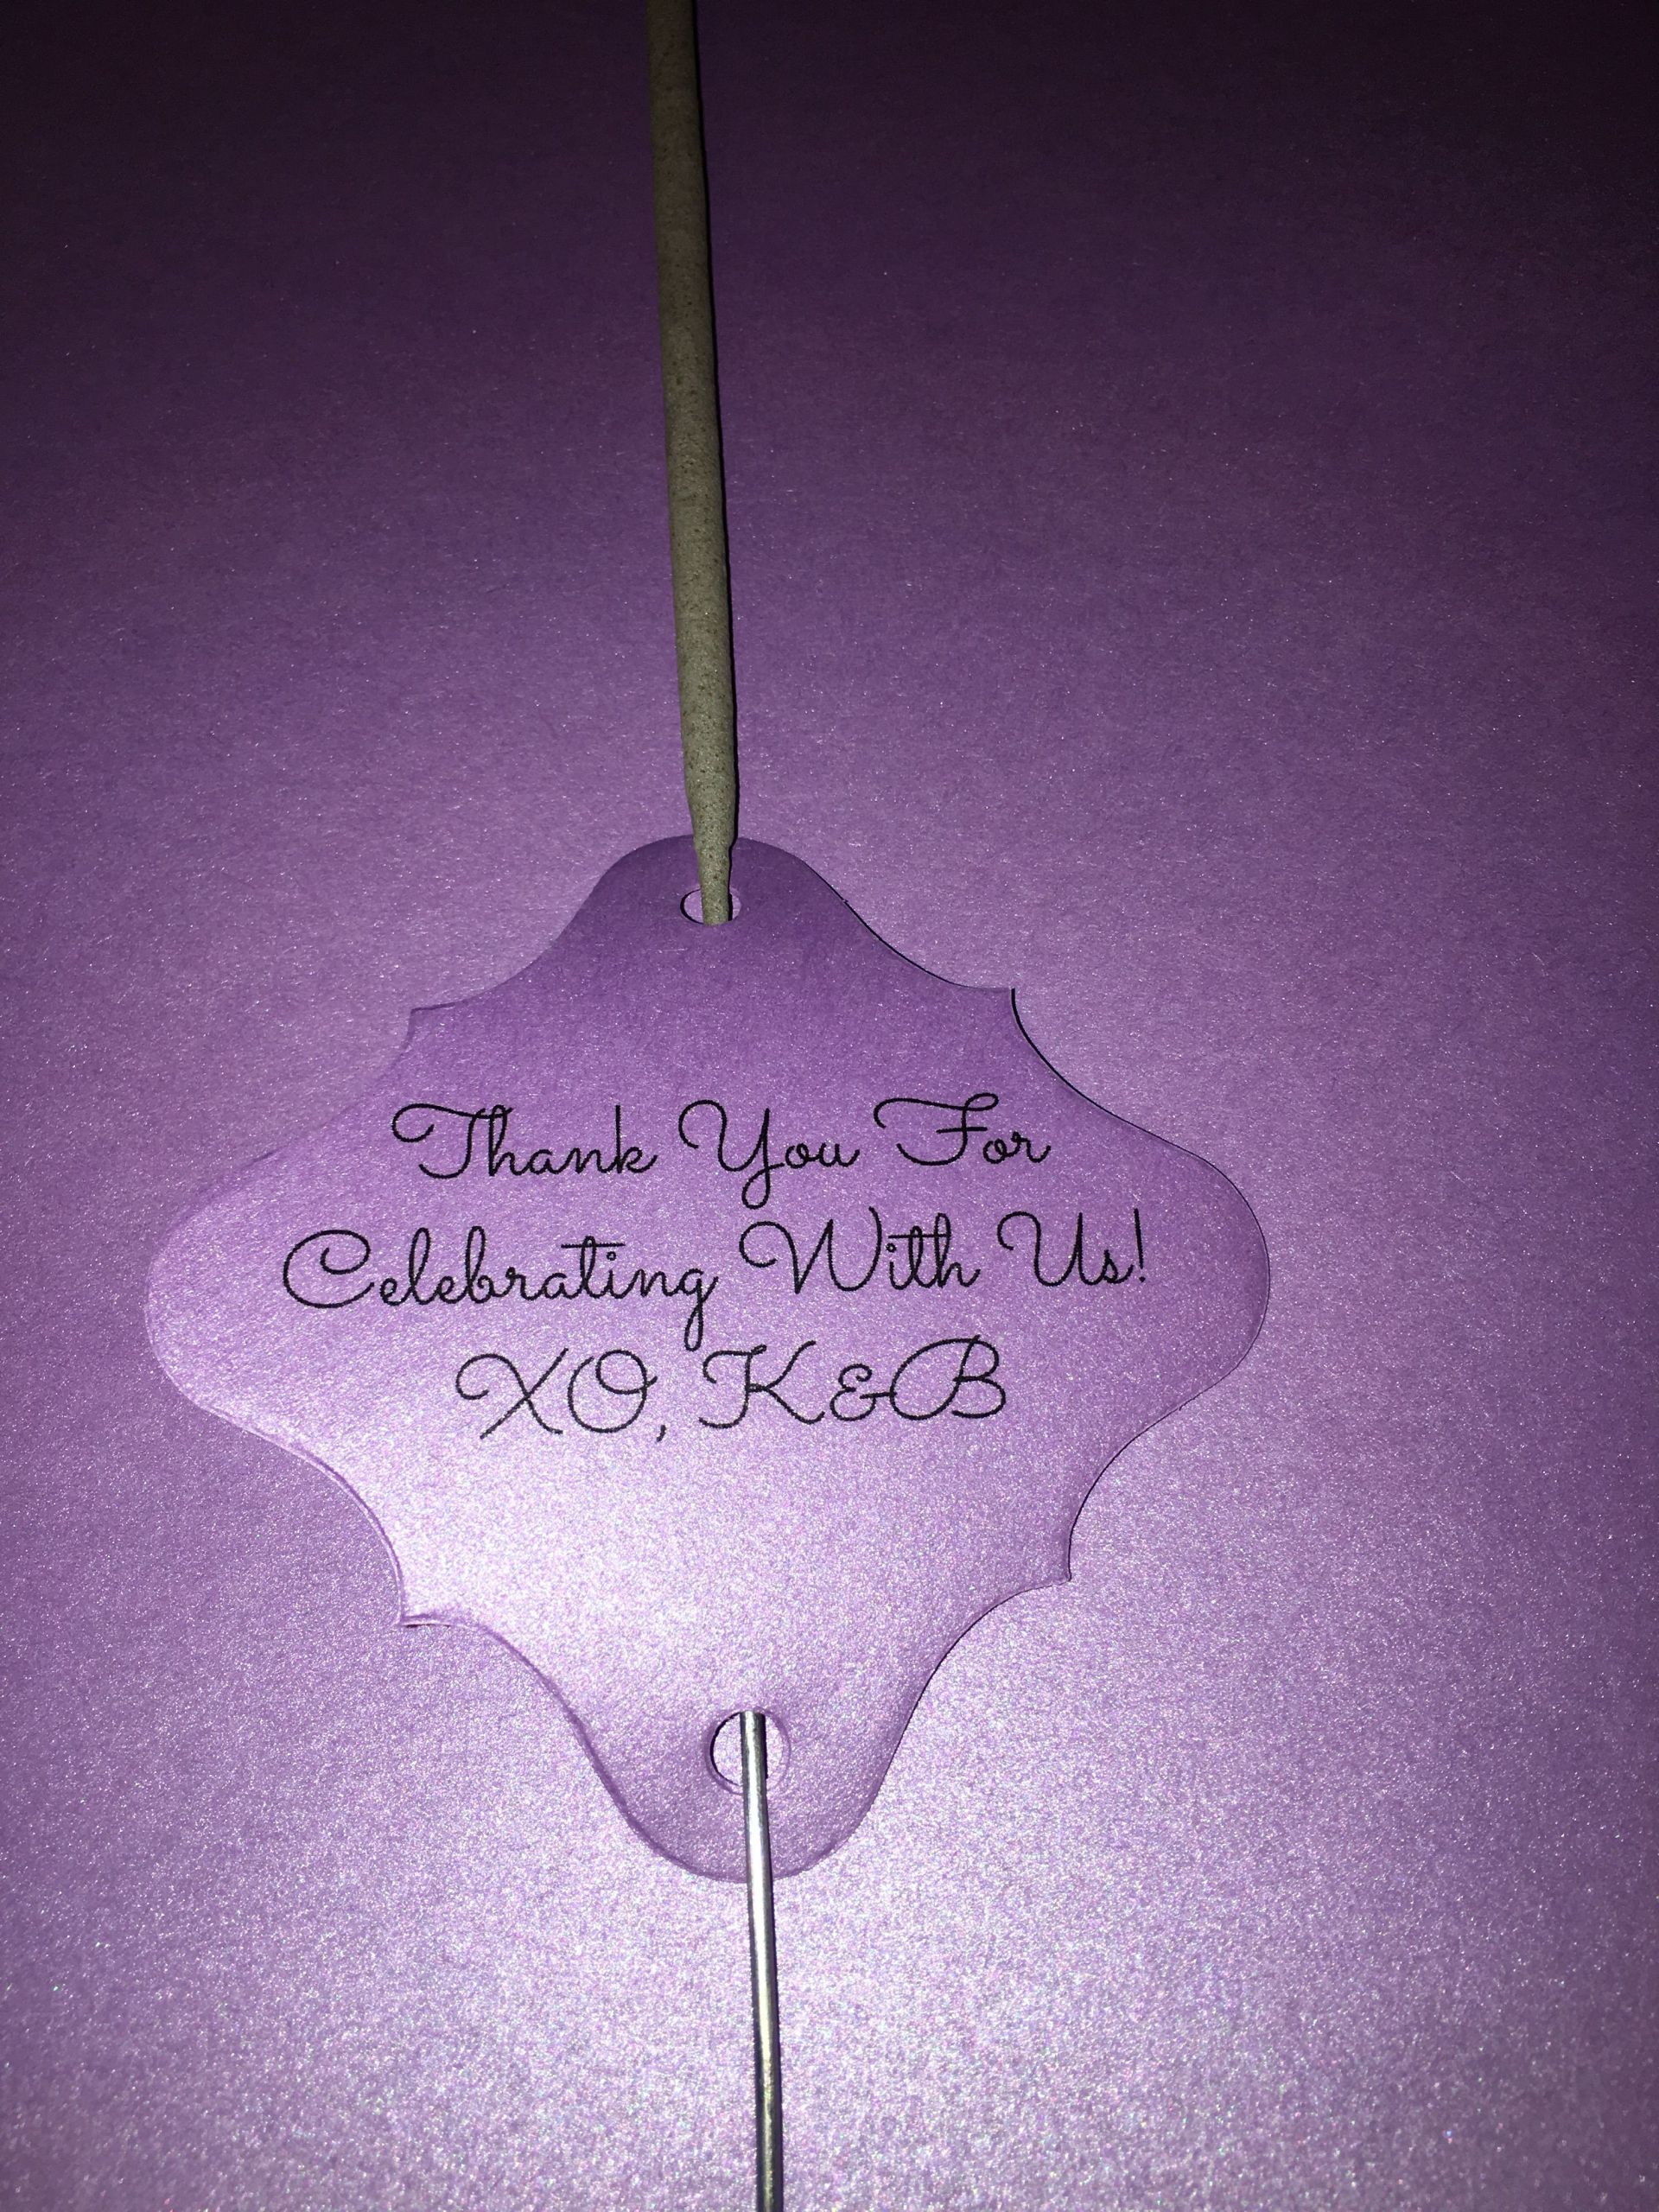 Wholesale Wedding Sparklers
 Pin by Wholesale Sparklers on Wedding Sparkler Tags